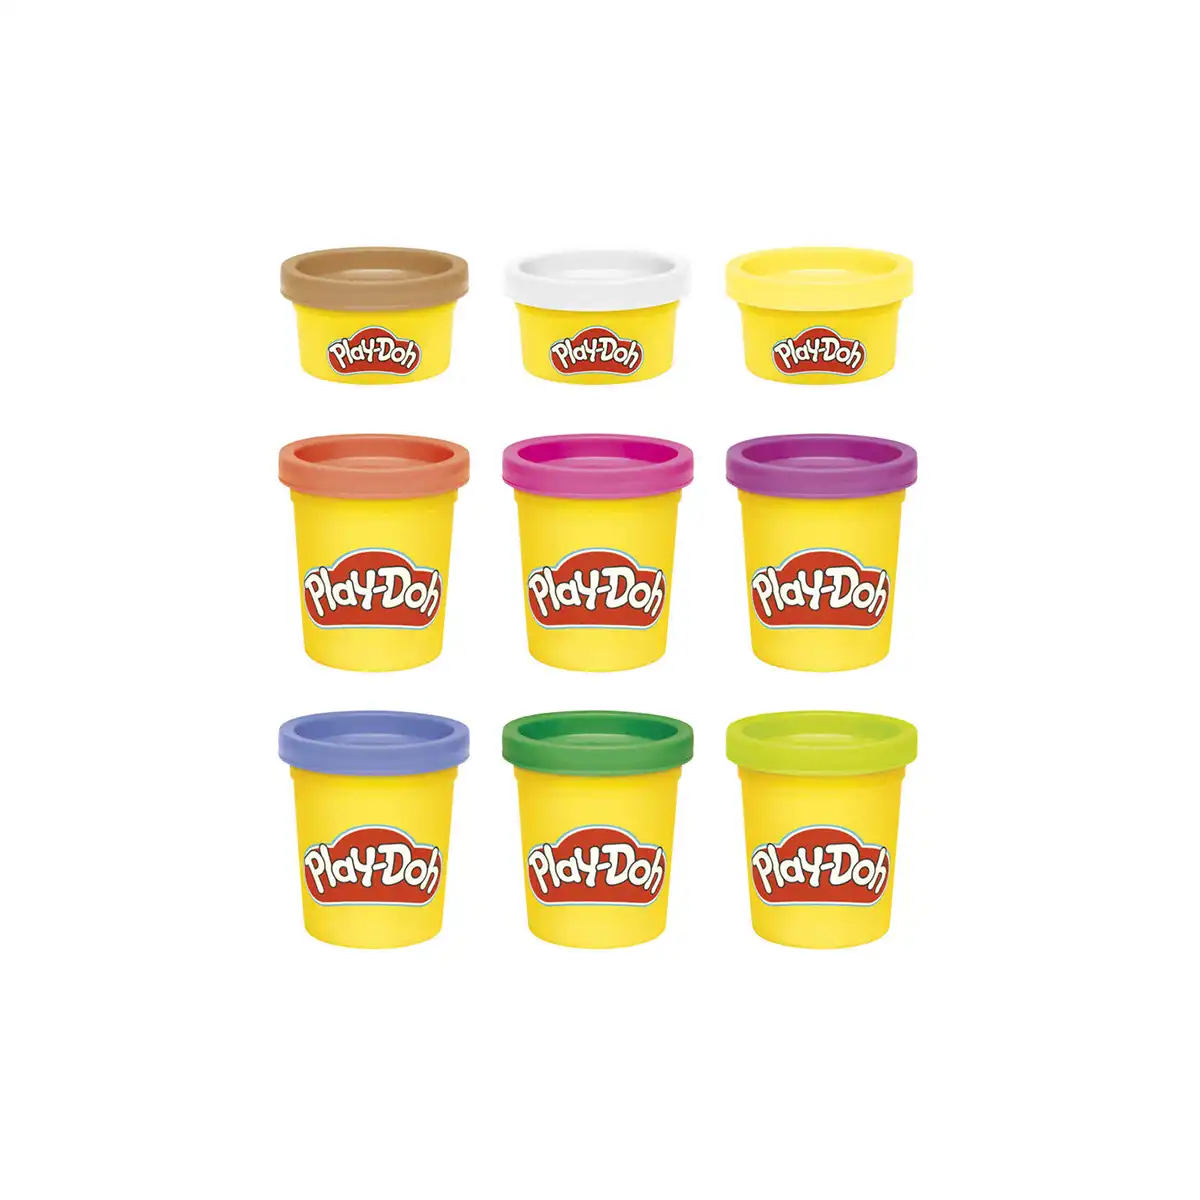 17 mini pots of Play-Doh in a variety of colours! Ages 2+